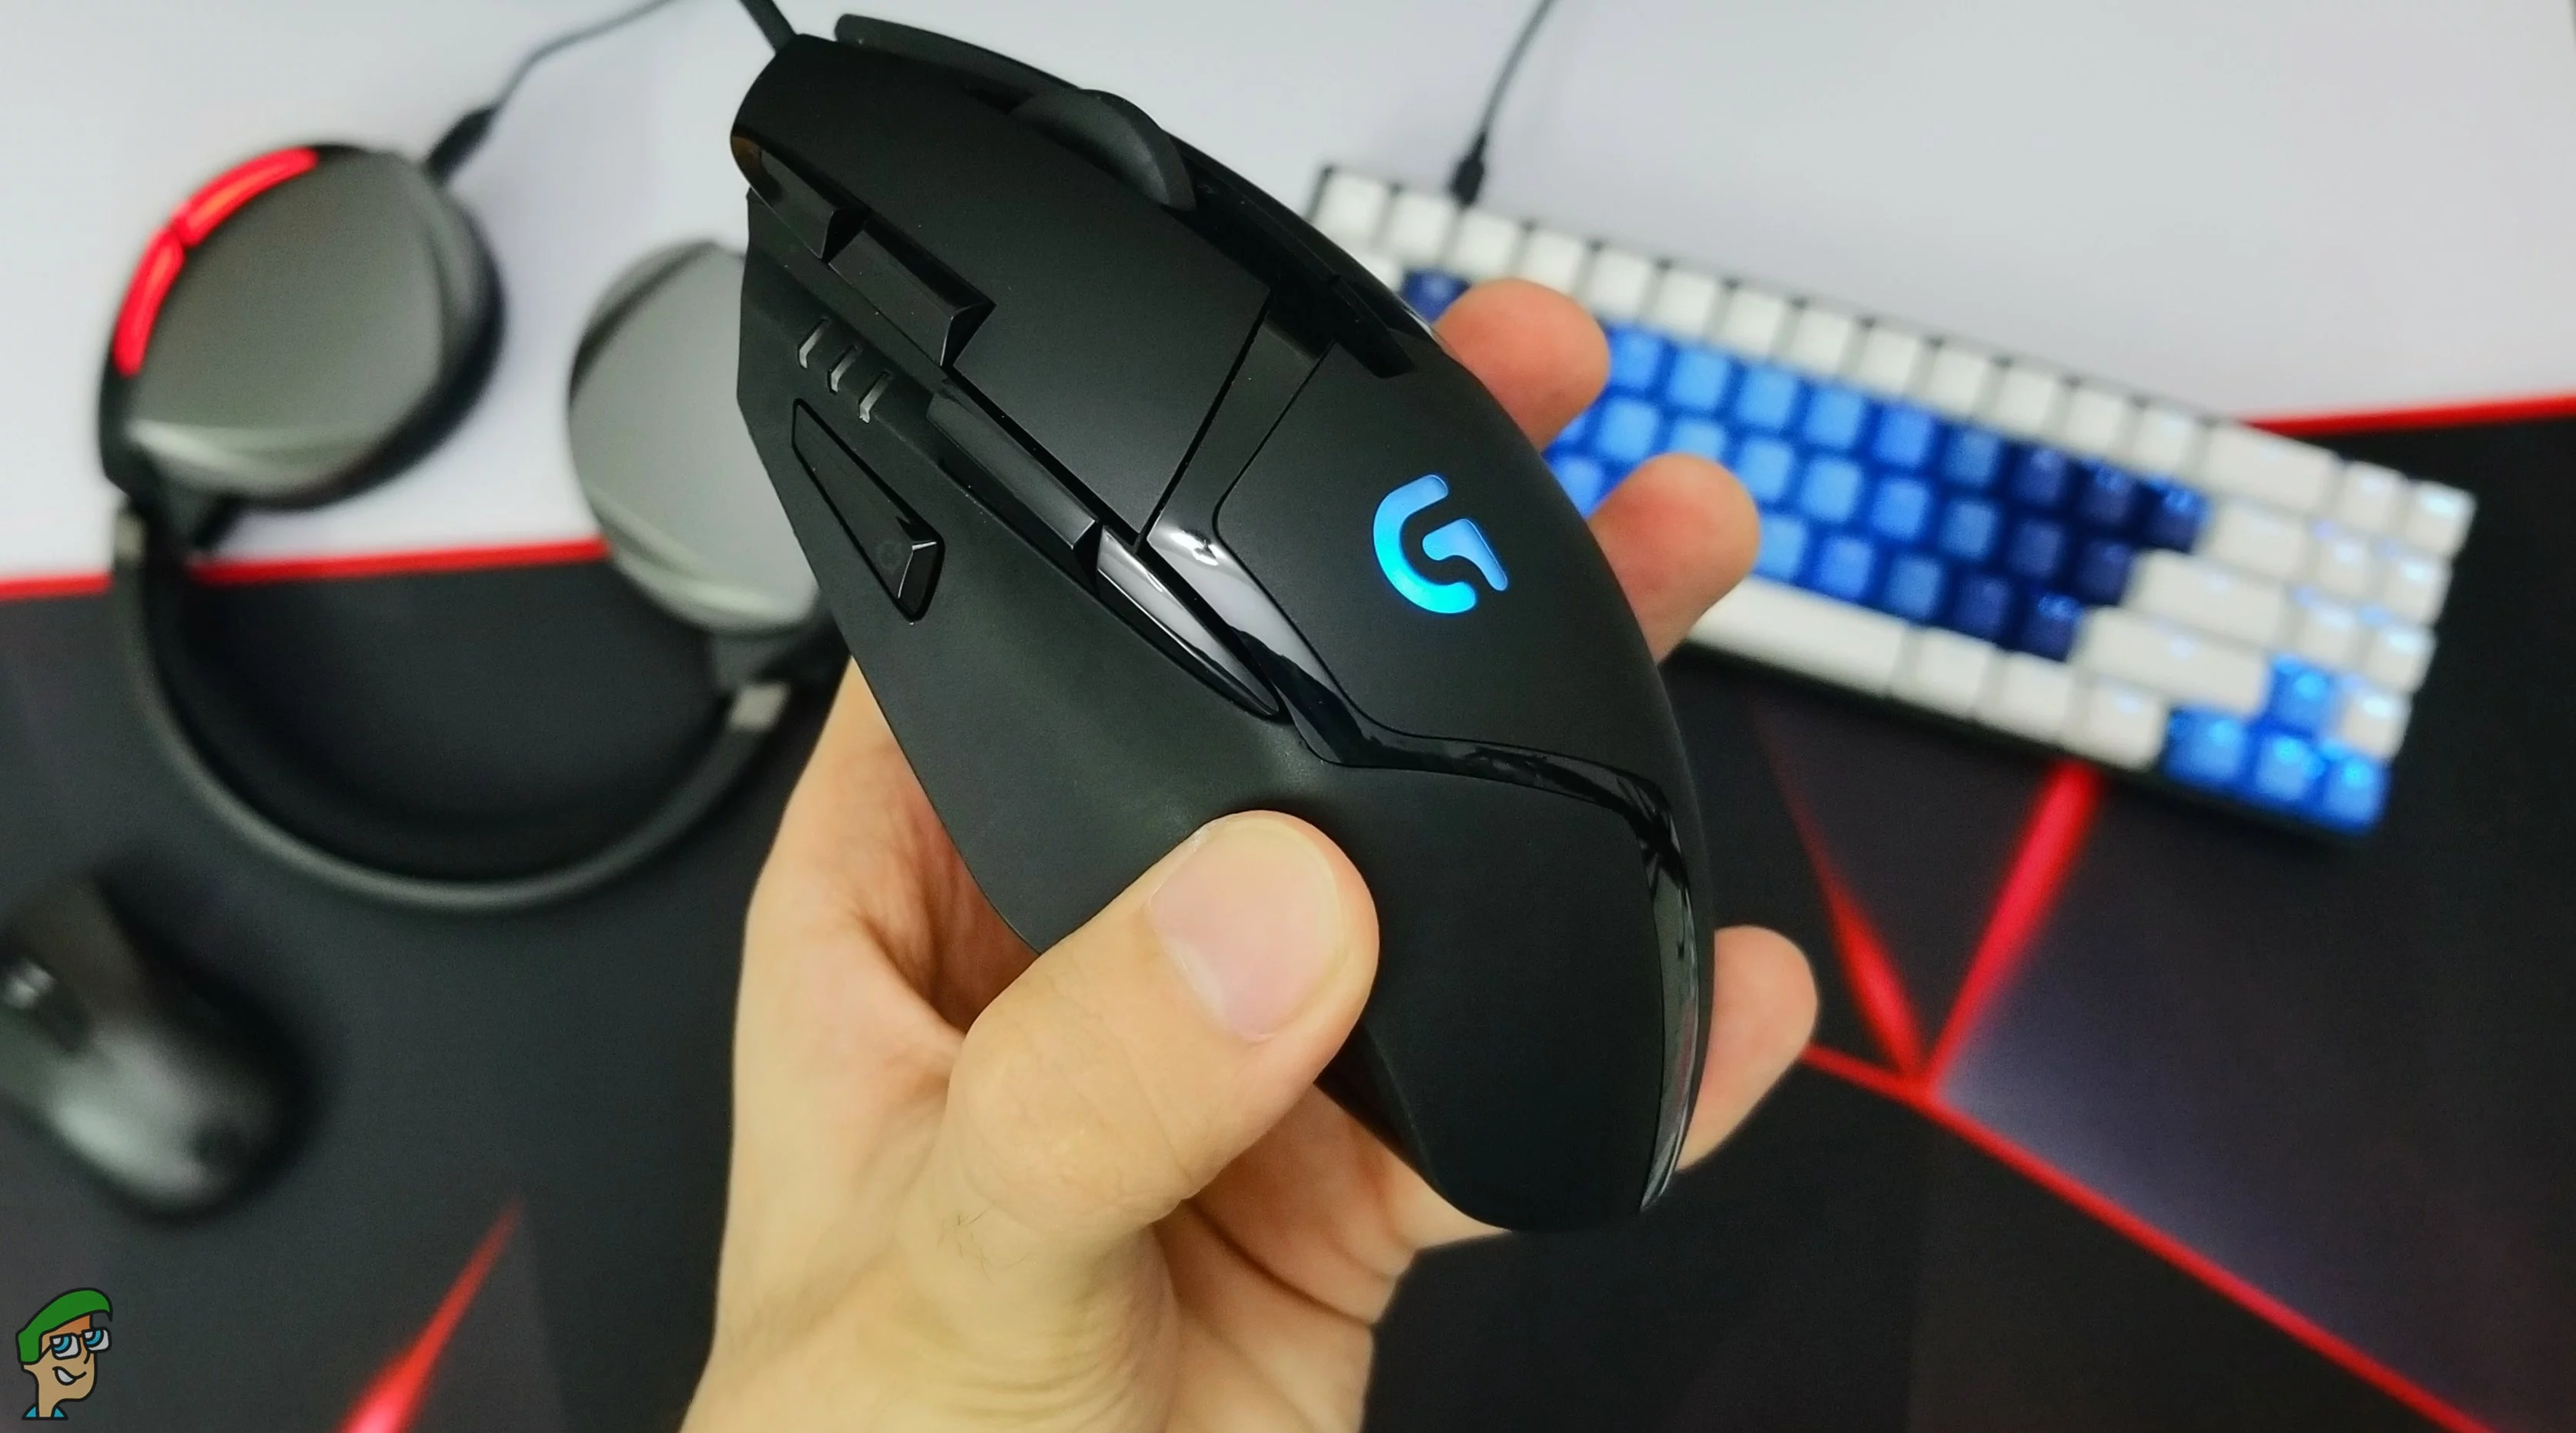 Logitech G402 gaming mouse close up shot with a background of our studio